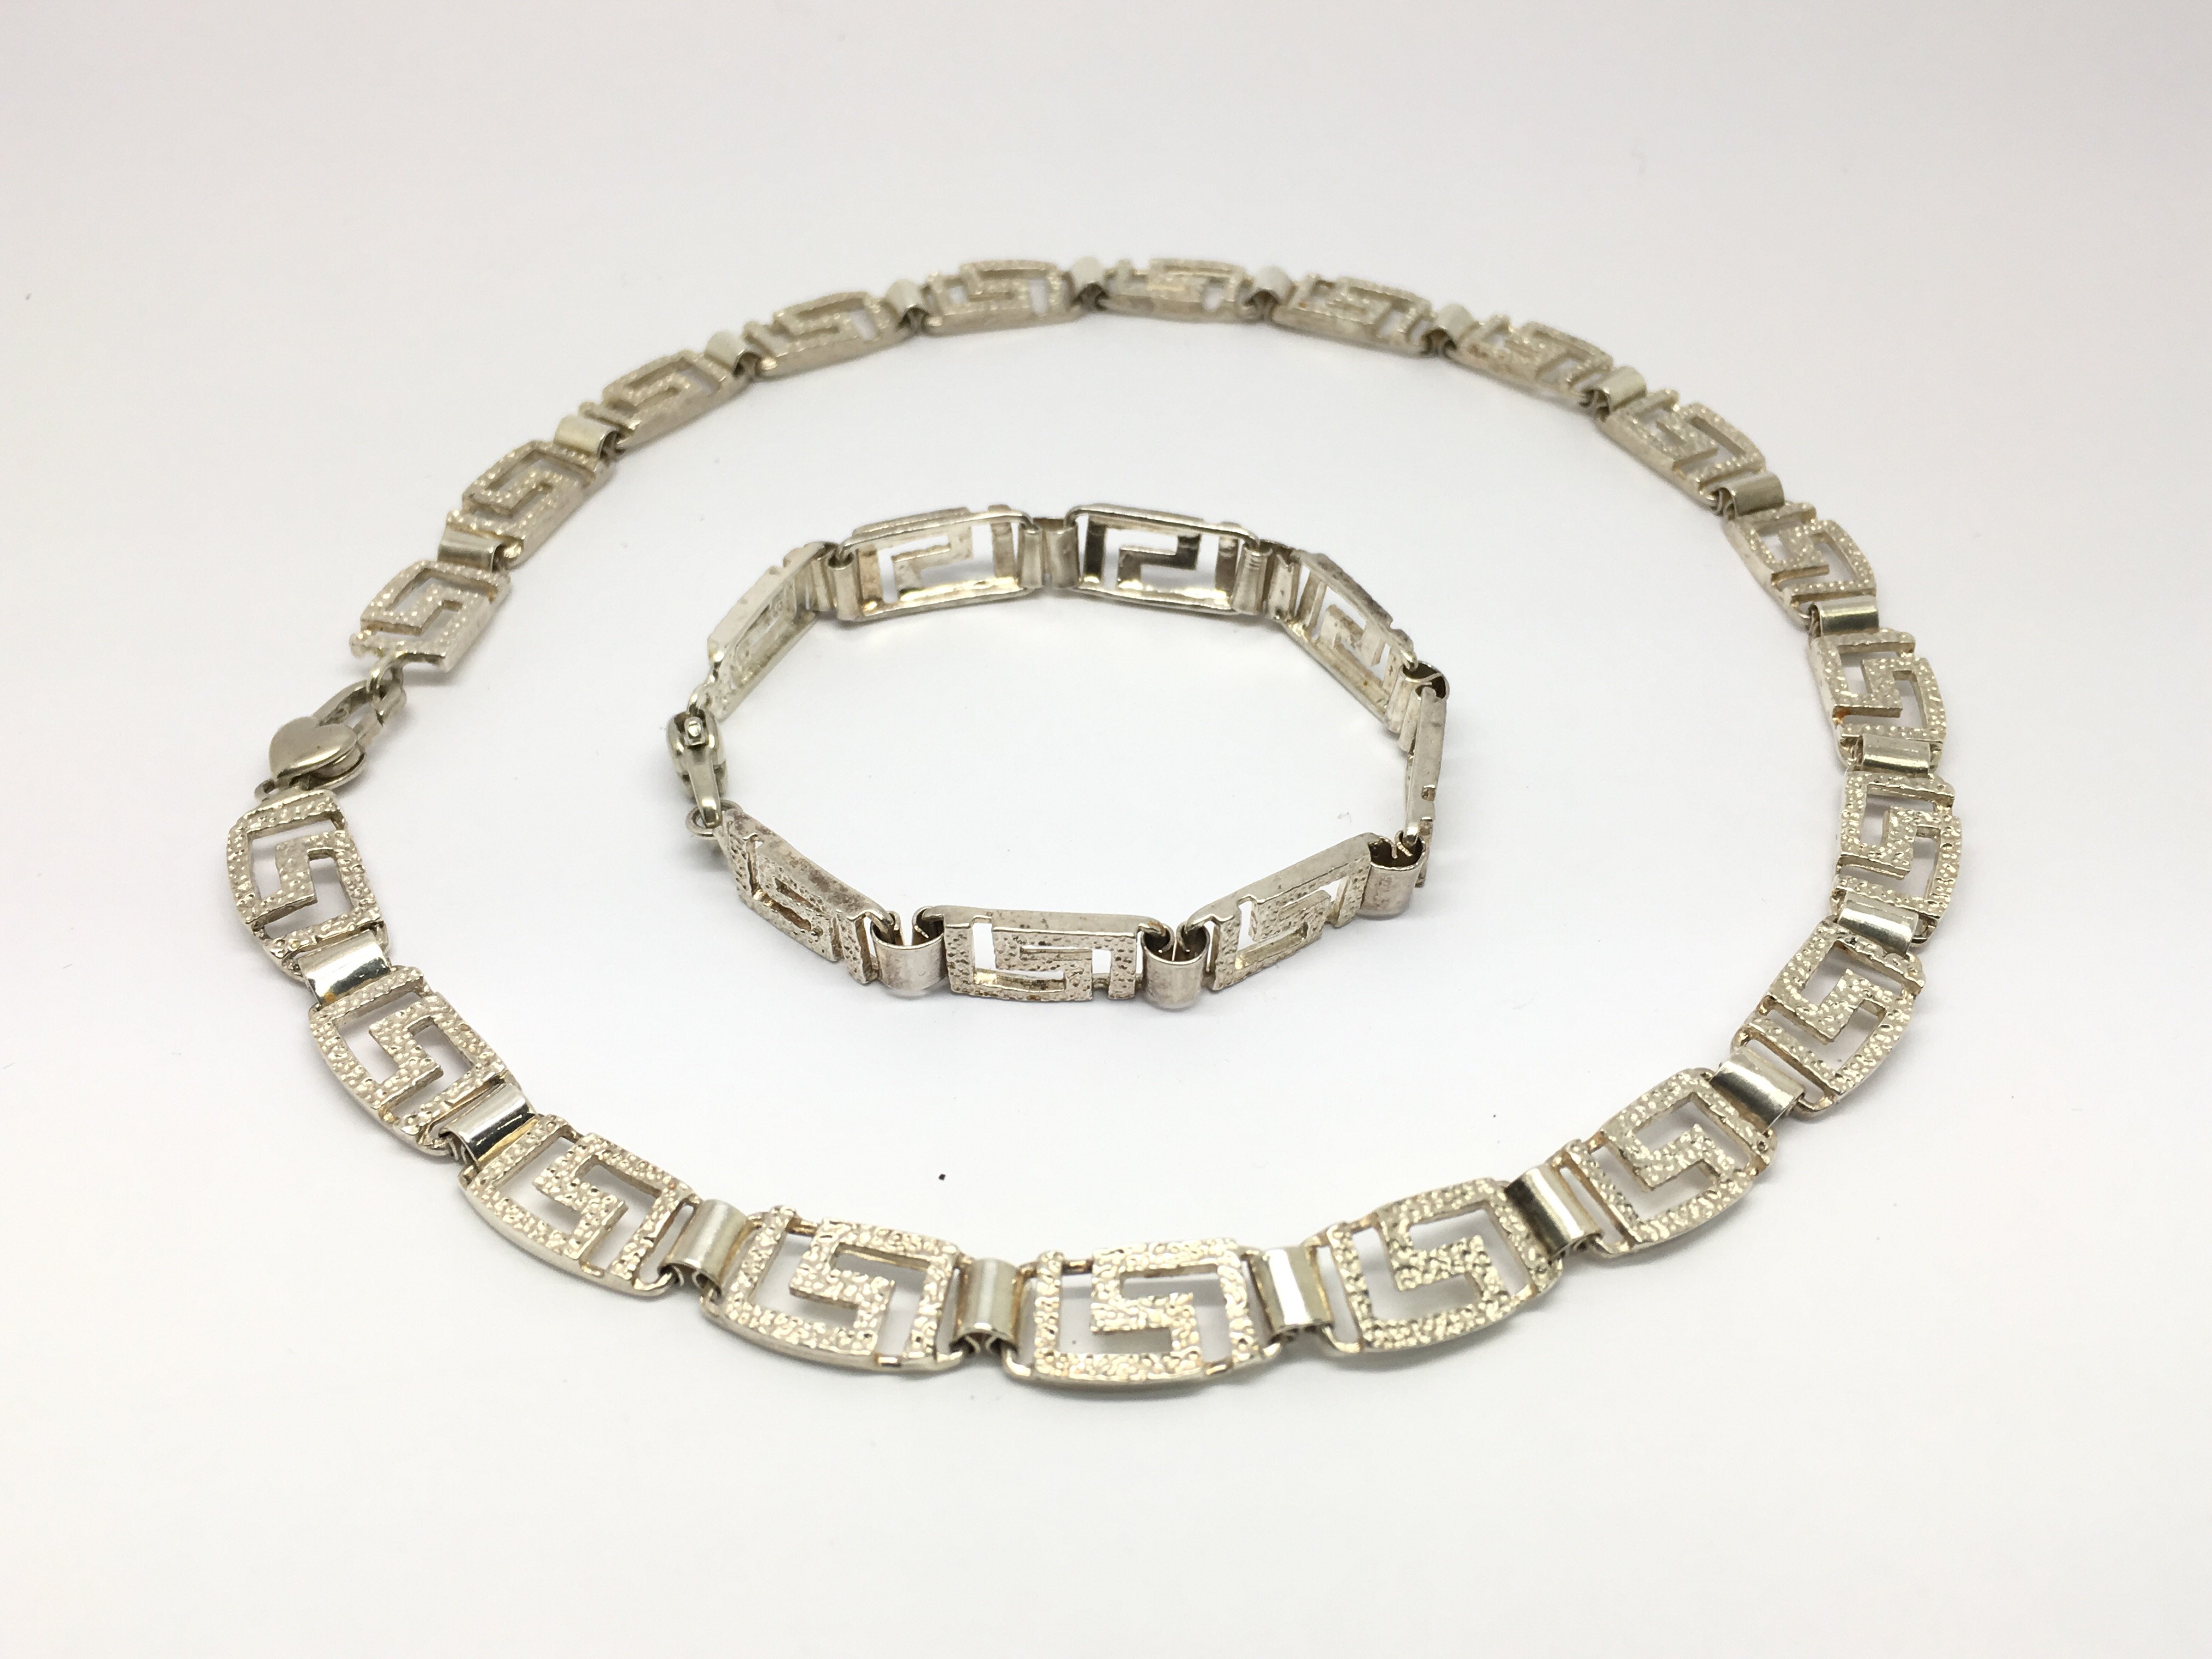 A silver necklace with conforming bracelet.